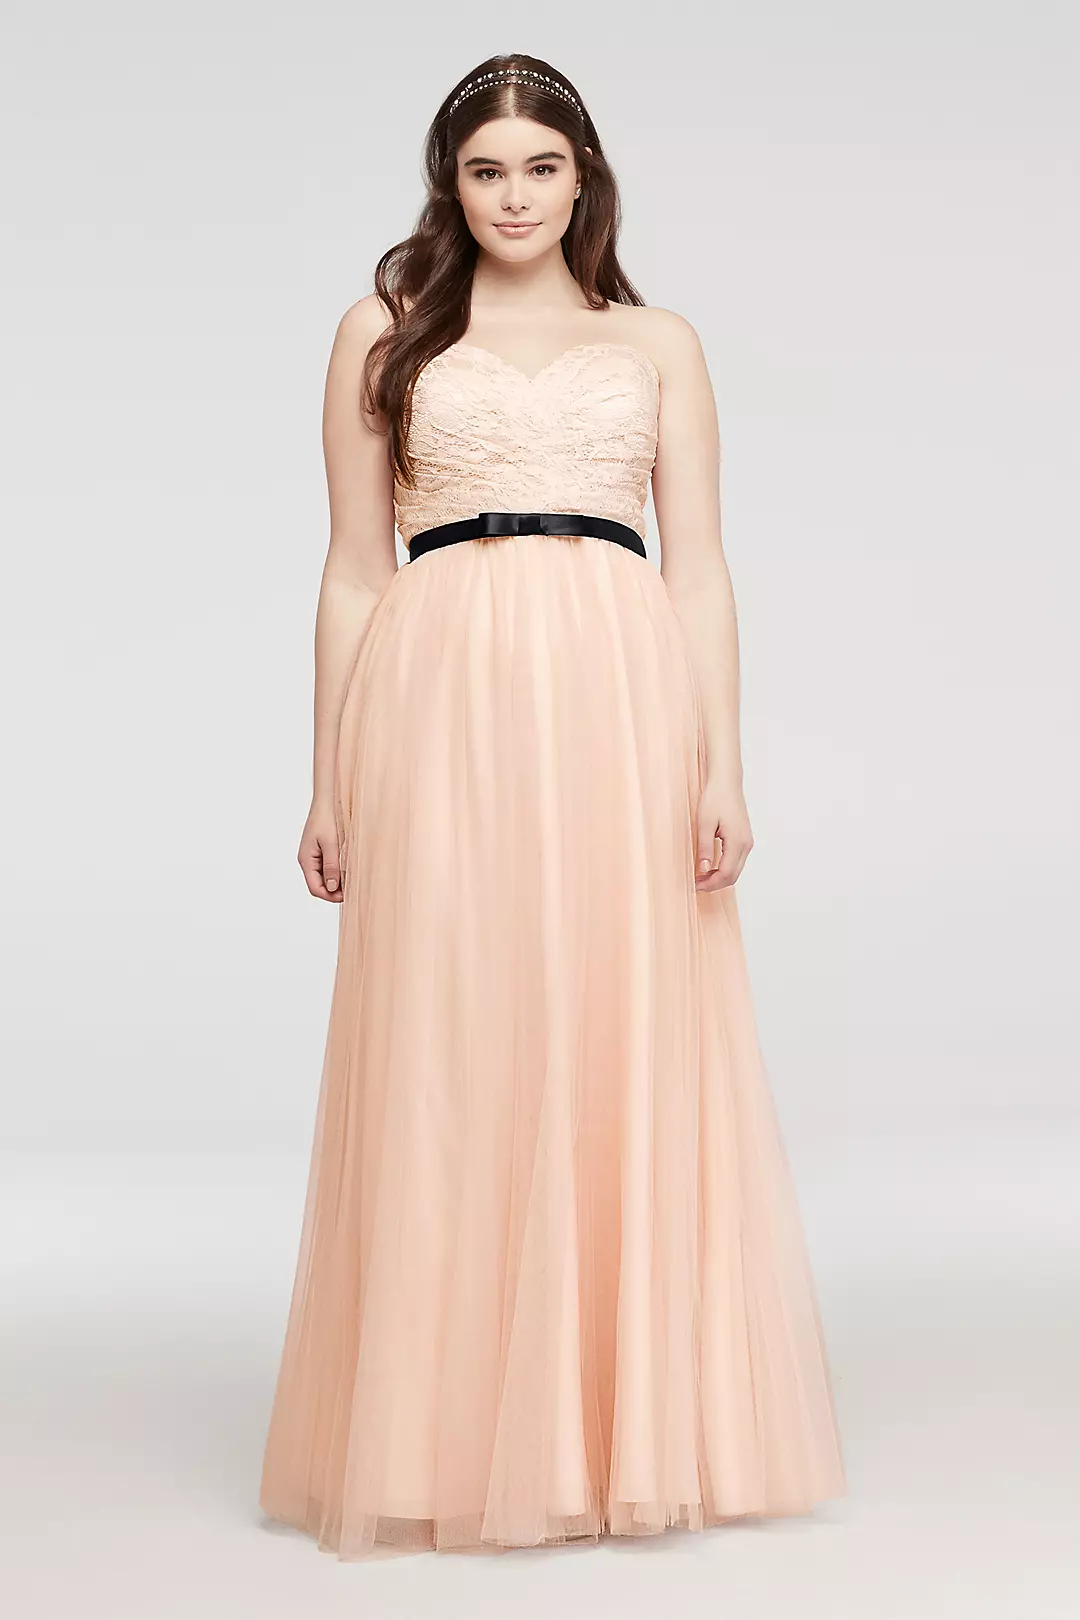 Strapless Tulle Prom Dress with Sash Image